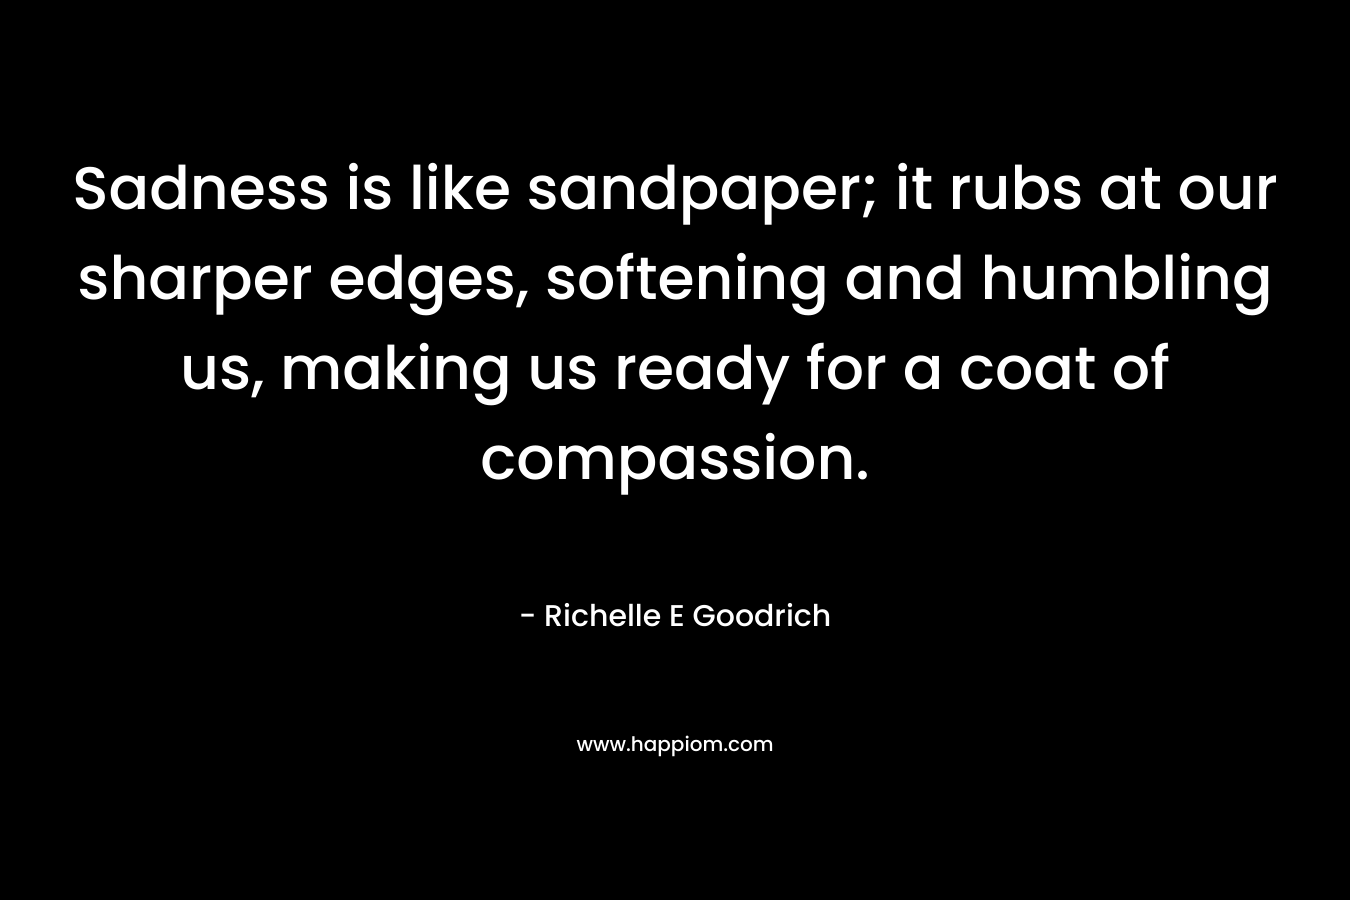 Sadness is like sandpaper; it rubs at our sharper edges, softening and humbling us, making us ready for a coat of compassion.